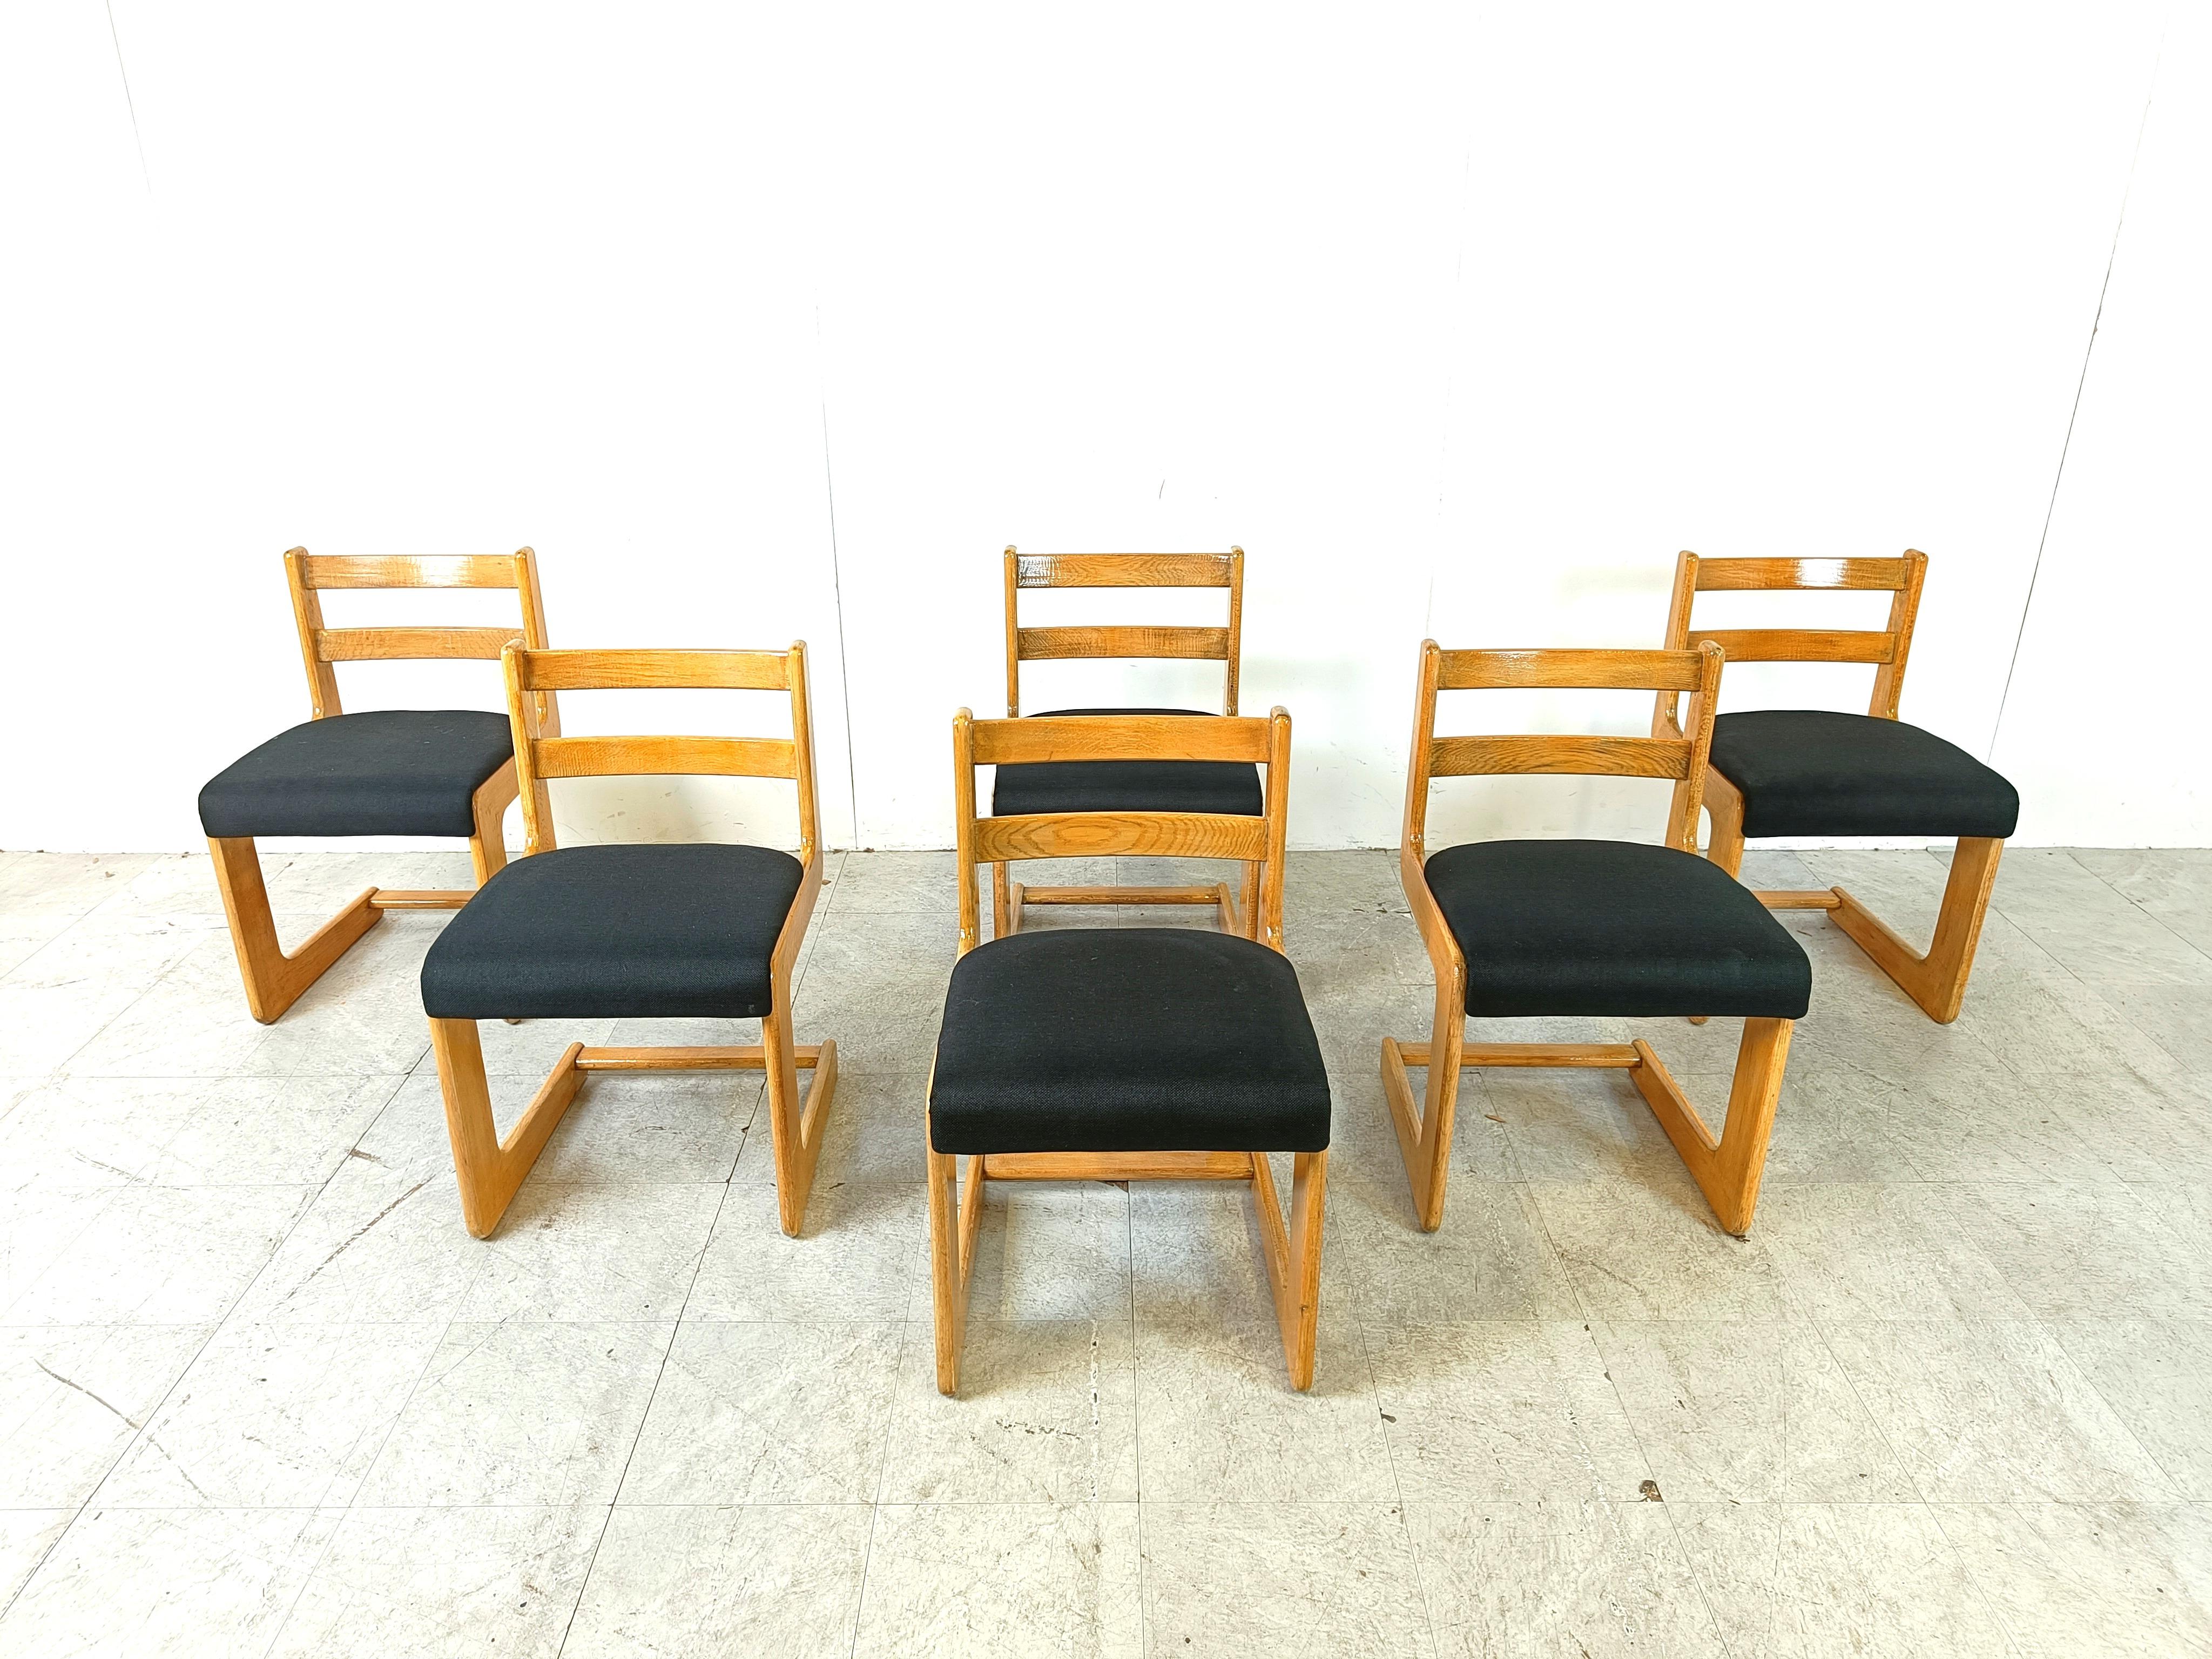 Set of 6 dining chairs by Casala with oak cantilever frames and newly upholstered fabric seats.

Beautiful timeless design 

Very good condition

1970s - Germany

Dimensions
Height: 78cm/30.70